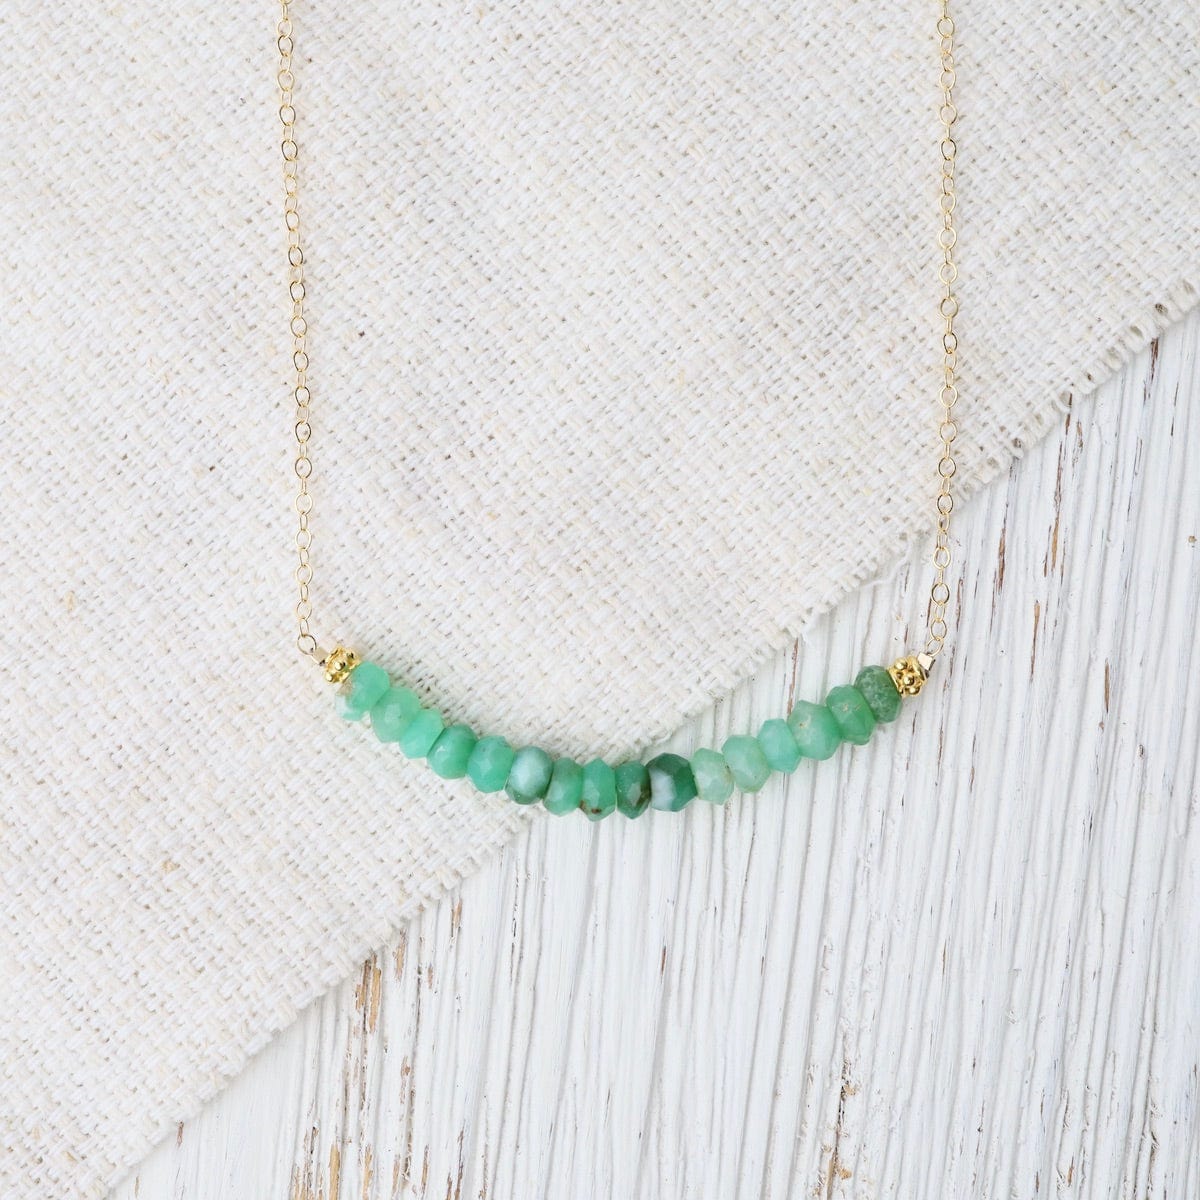 NKL-GF Gold Filled Chain with Gemstone Arc - Chrysoprase